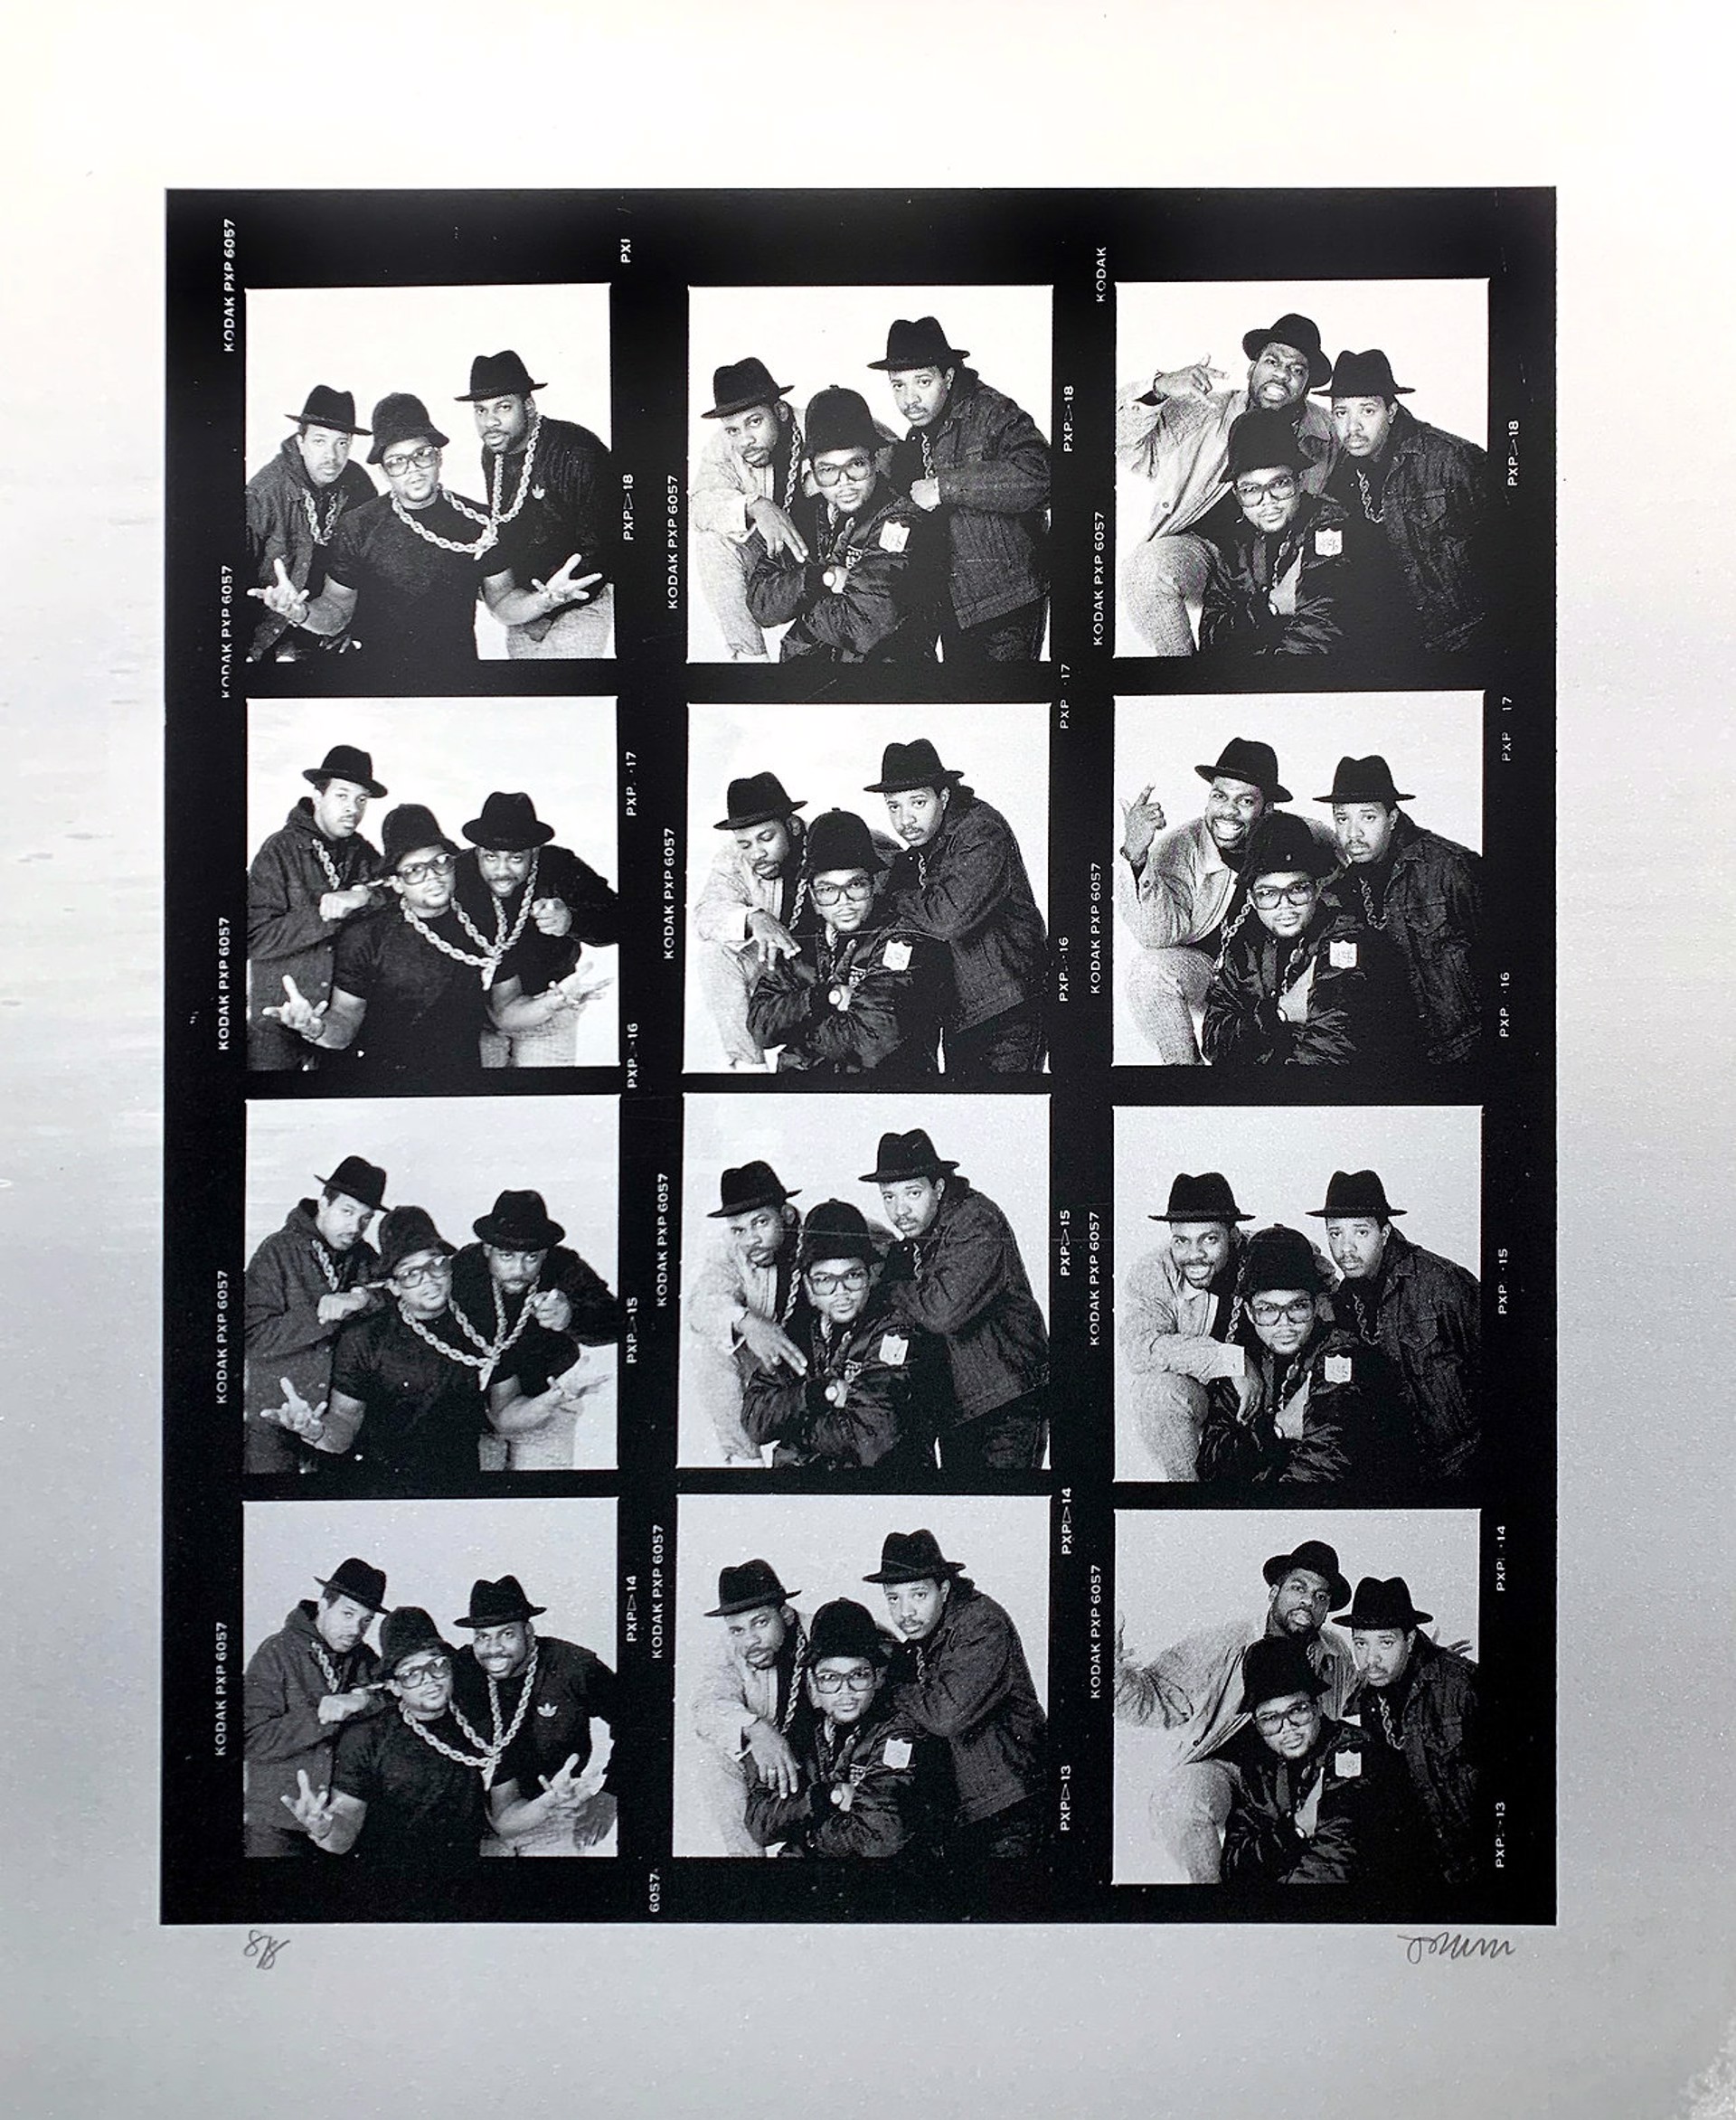 RUN DMC 1988 PIONEERS OF HIP HOP Contact Sheet (Unique Silver Blend) by Janette Beckman